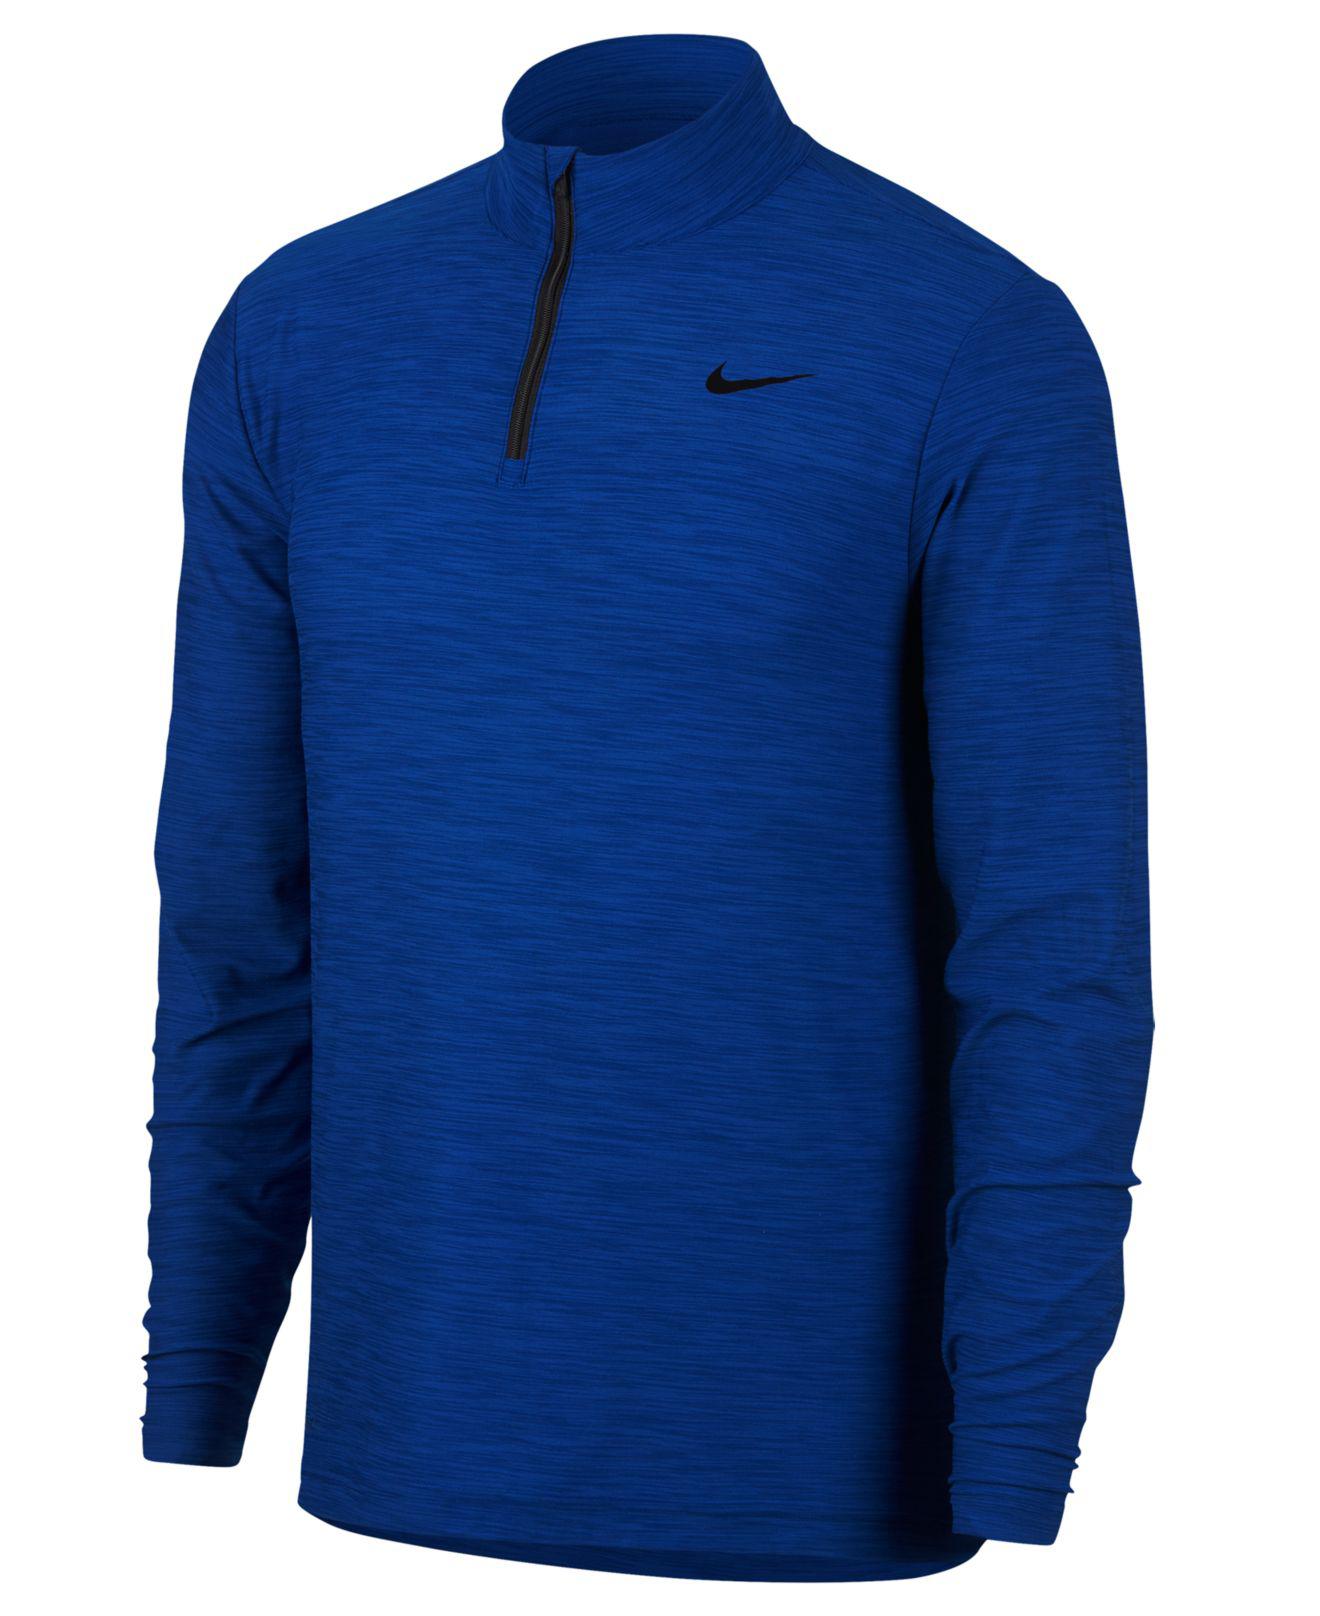 Nike Synthetic Breathe Quarter-zip Training Top in Blue for Men - Lyst